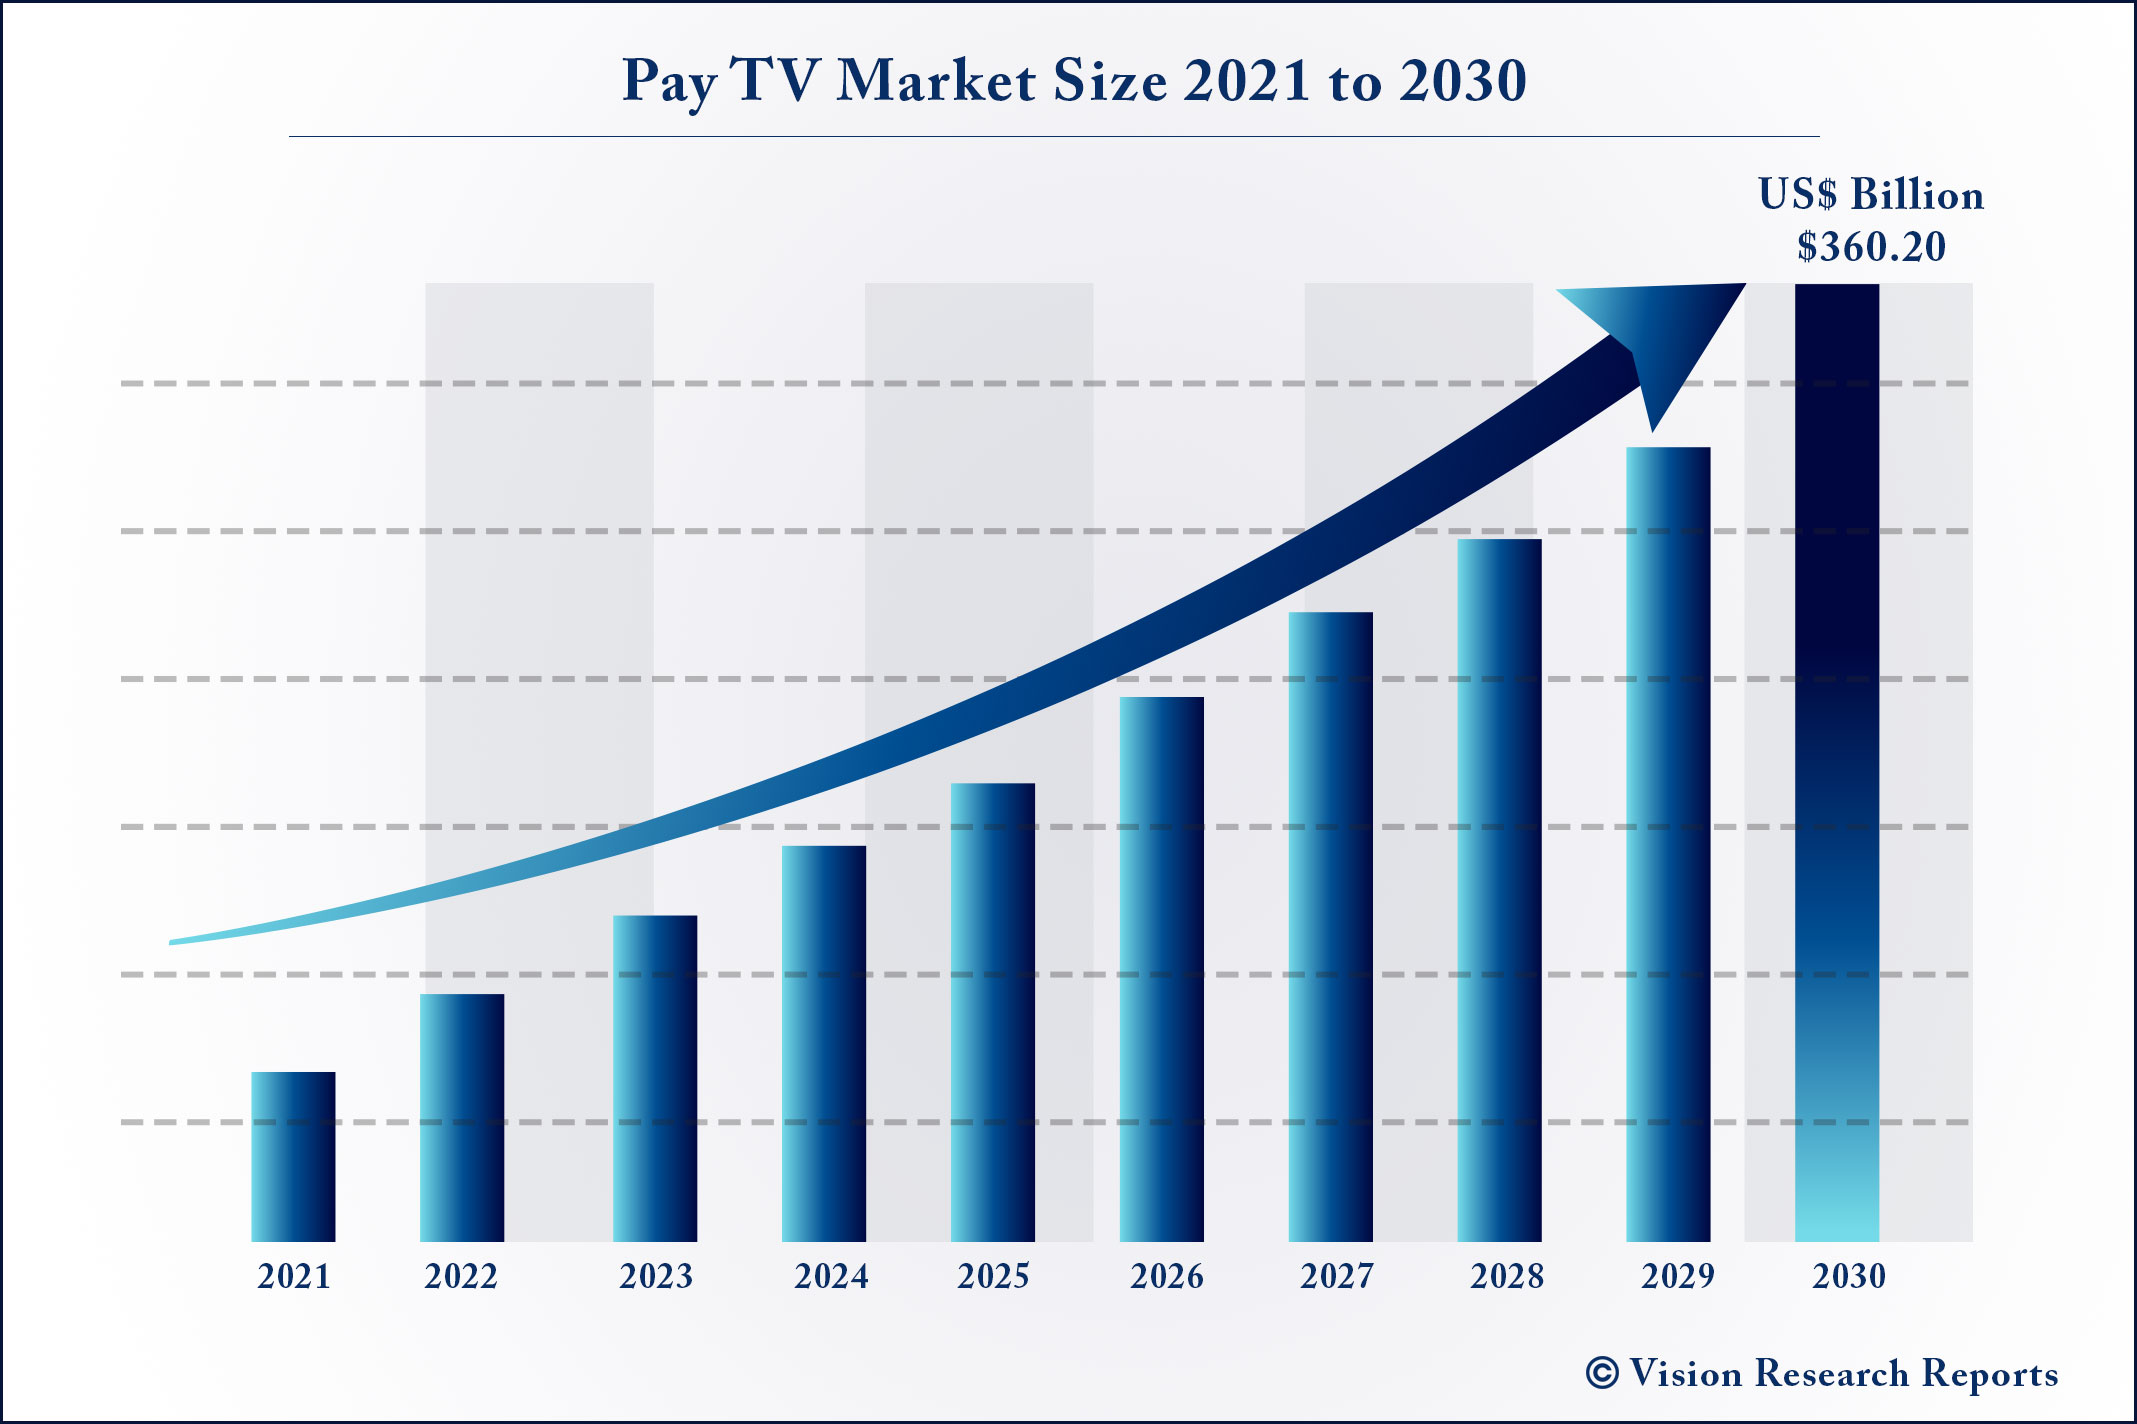 Pay TV Market Size 2021 to 2030